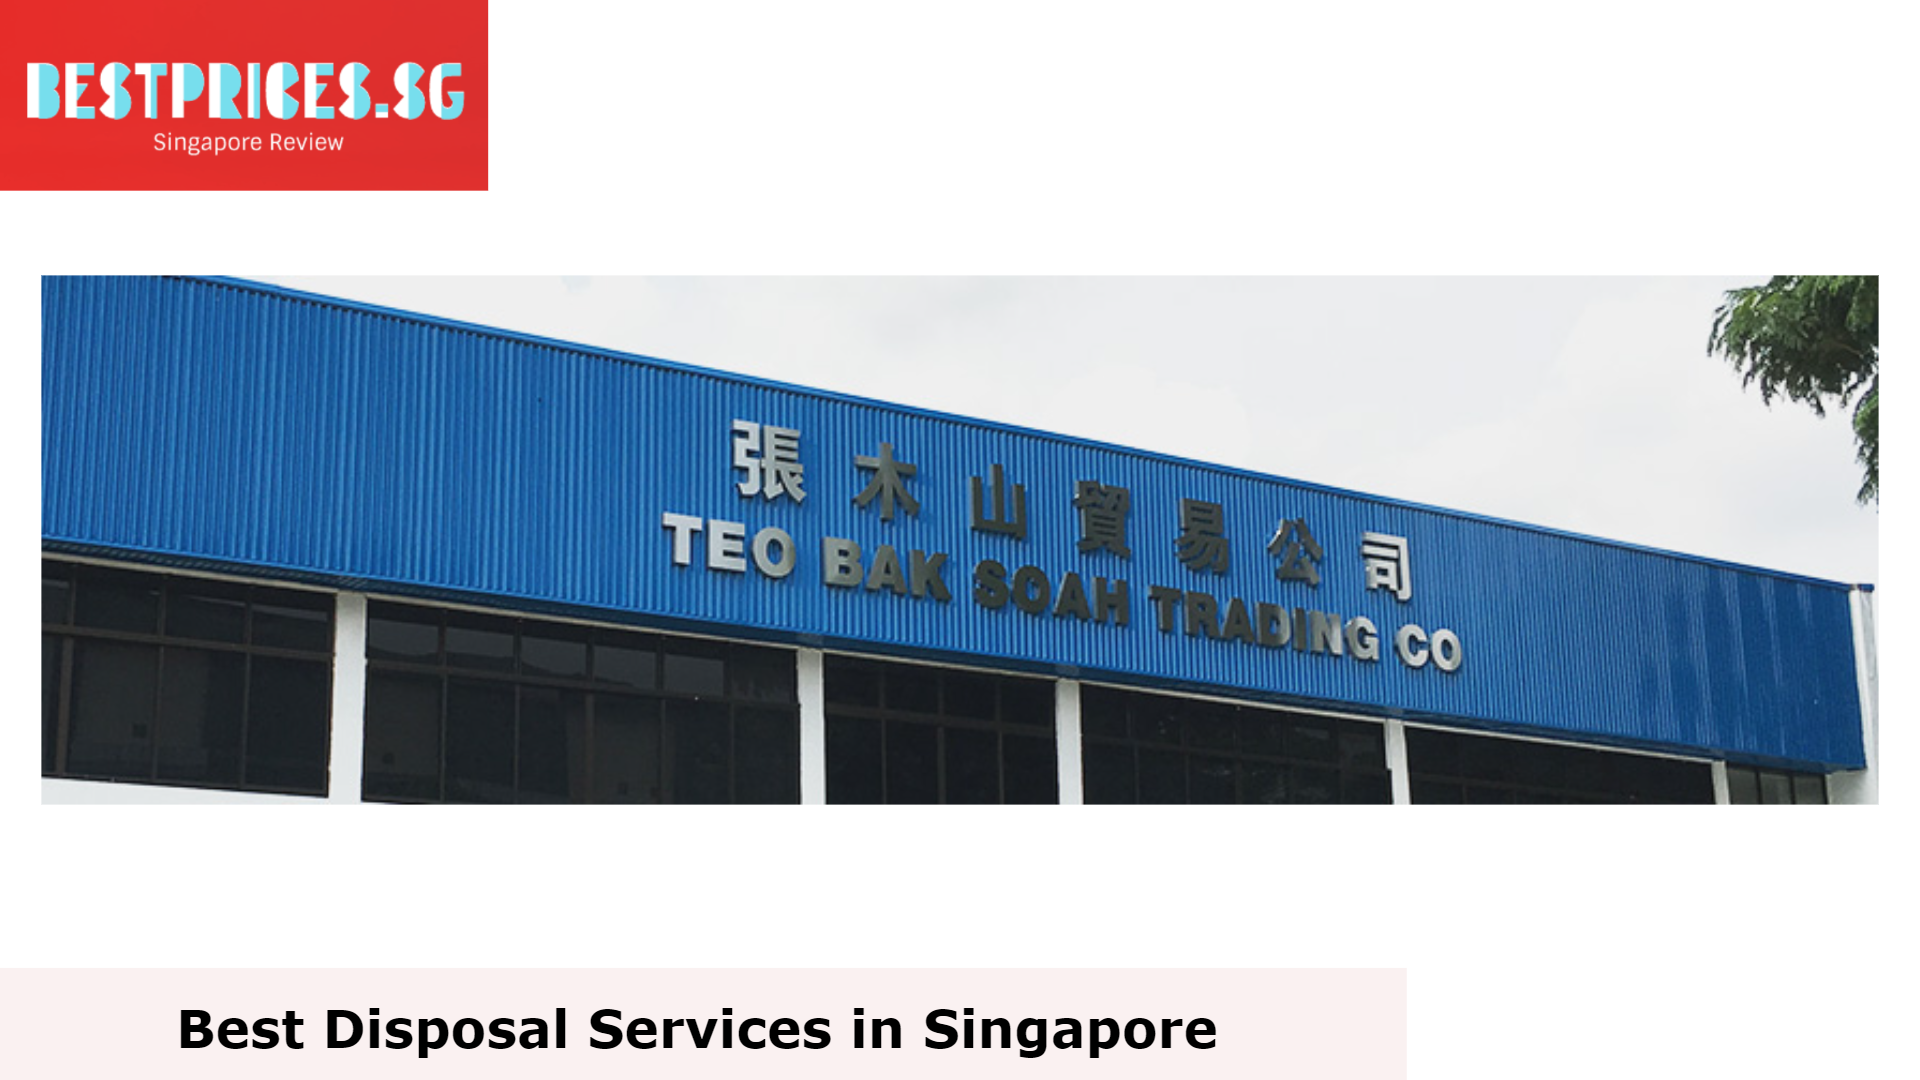 Teo Bak Soah Trading Co. - Best Disposal Services in Singapore, Disposal Services Singapore, Cheap Disposal Services, Waste Management Services, How much is disposal in Singapore?, How do I dispose of bulky items in Singapore?, How much does it cost to dispose of a couch Singapore?, How do I get rid of junk in Singapore?, Rubbish Disposal Service Singapore, Bulky Item Disposal, free disposal services singapore, disposal services singapore cost, cheapest disposal services singapore, furniture disposal services singapore, bulky waste disposal singapore, free disposal of bulky items singapore, disposal services prices, 